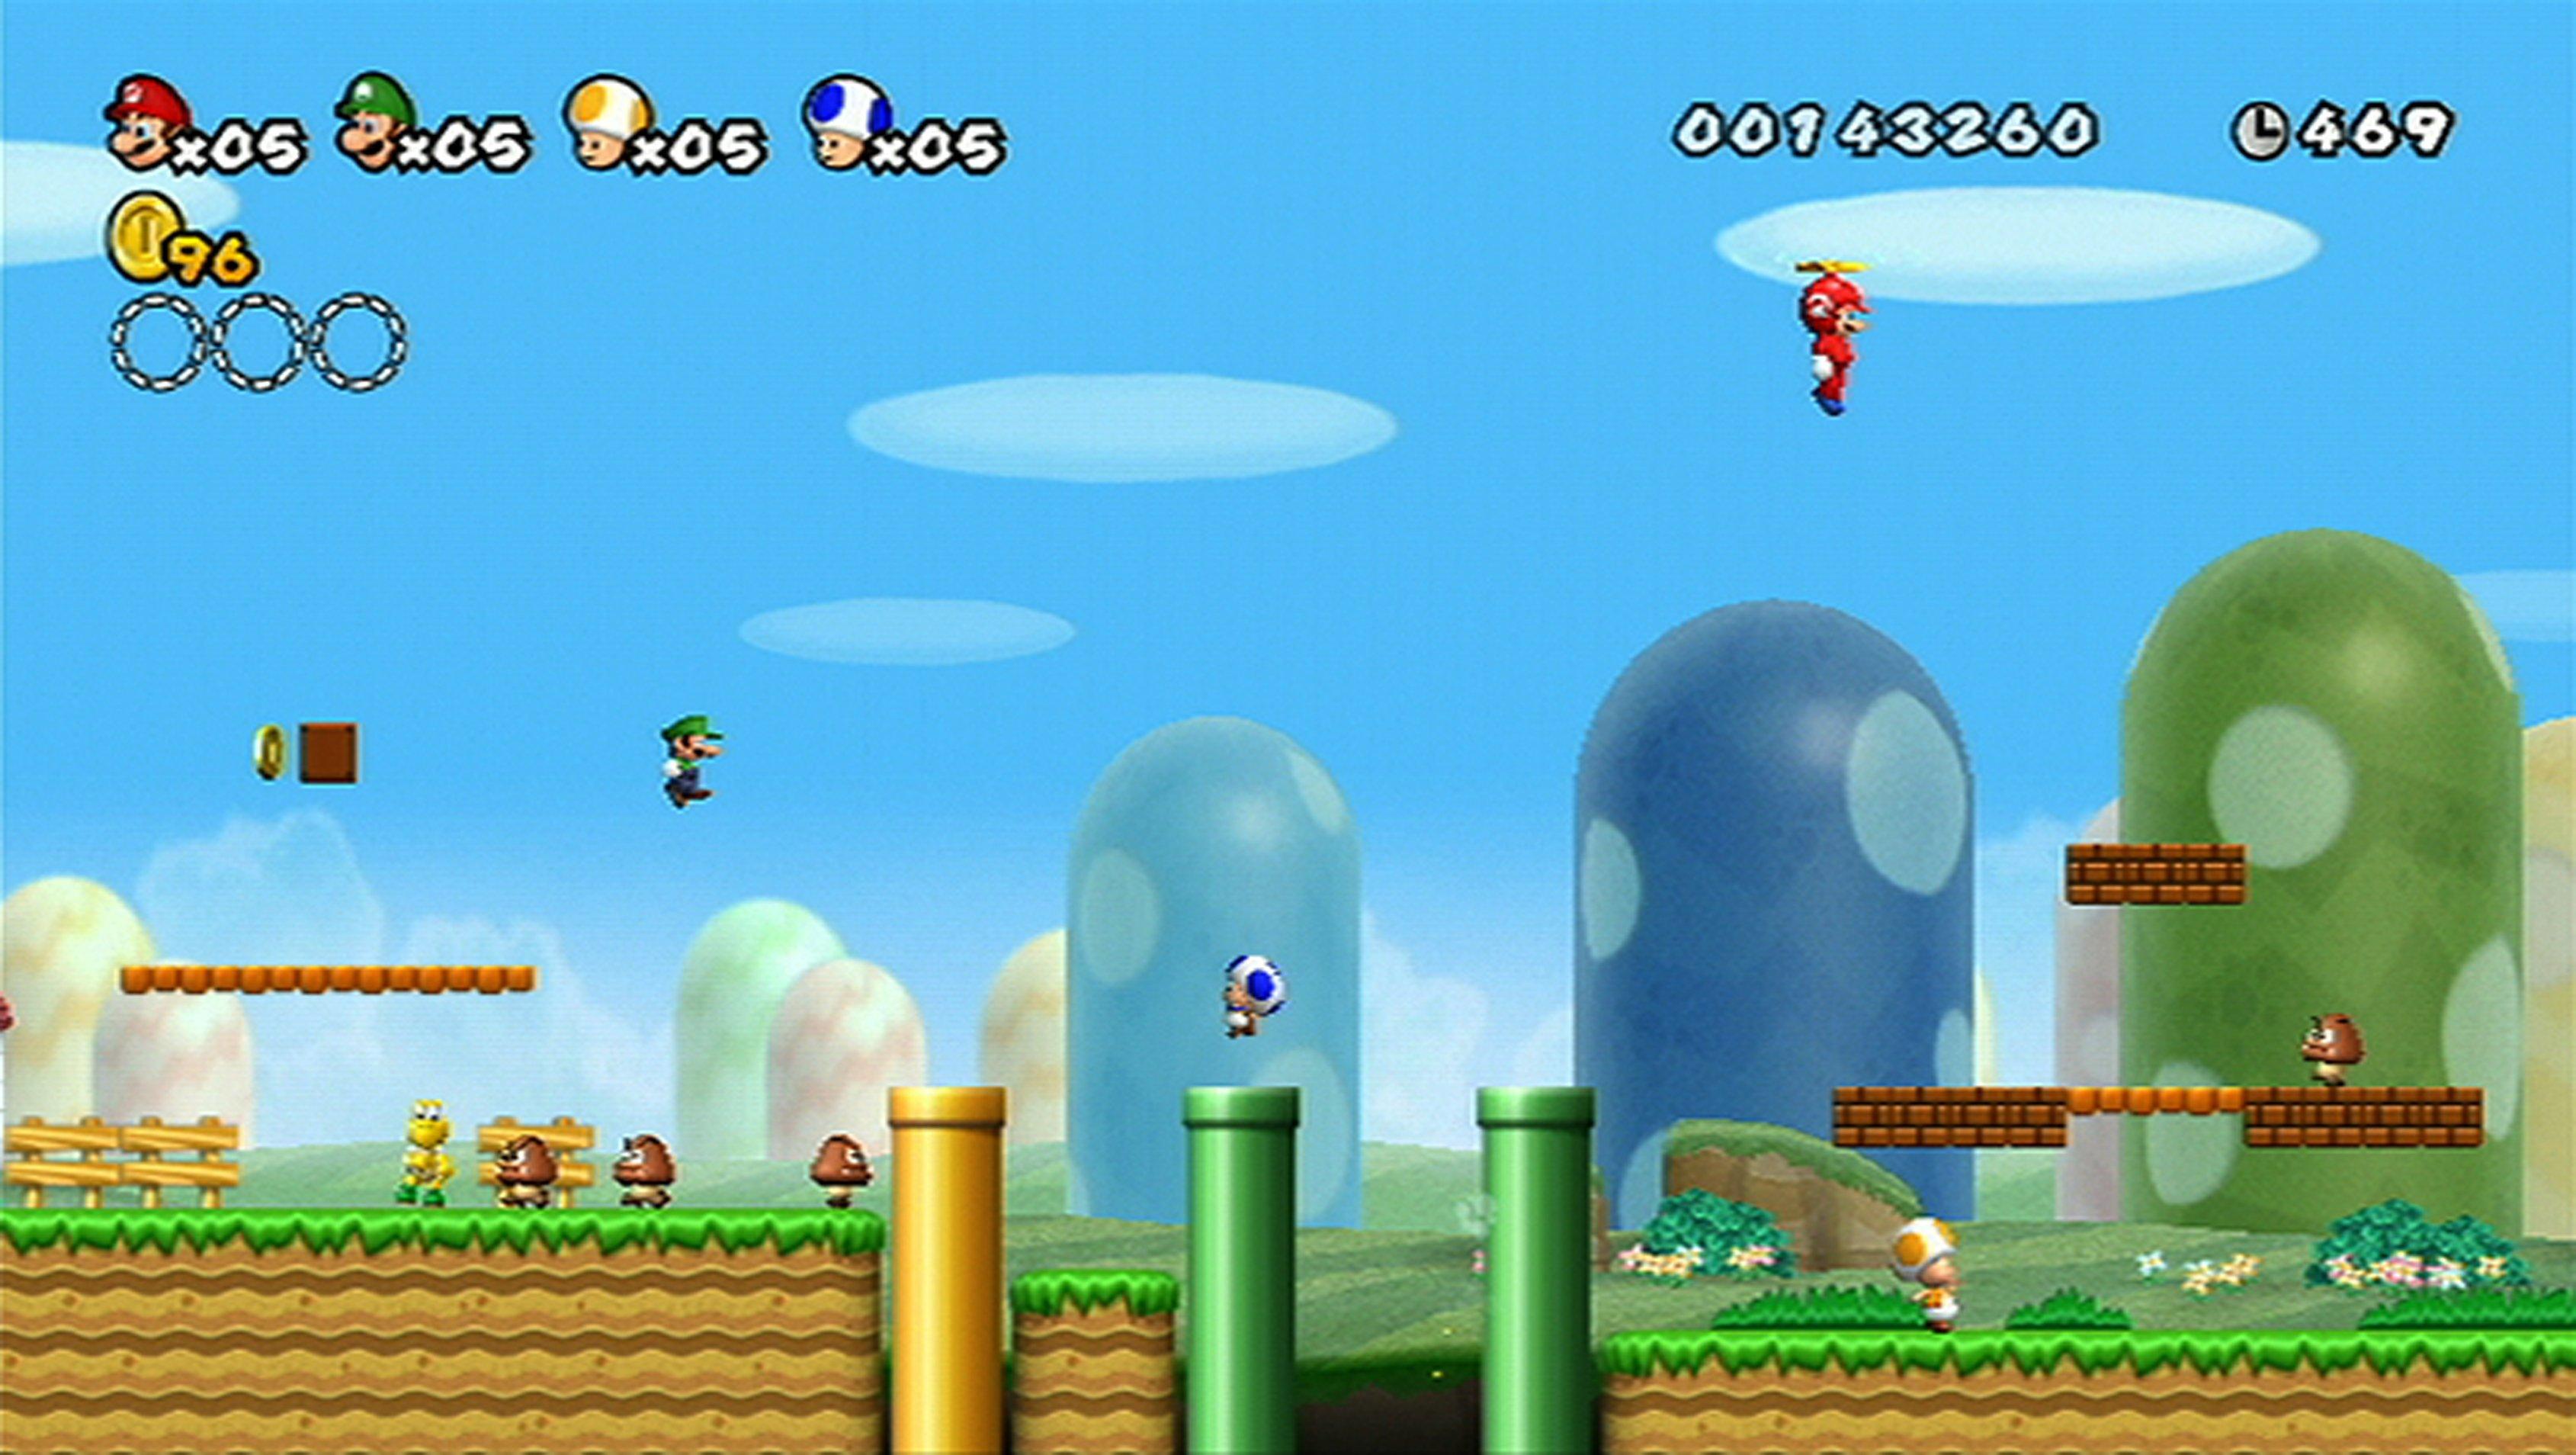 New Super Mario Bros Wii - Free-for-All Mode 